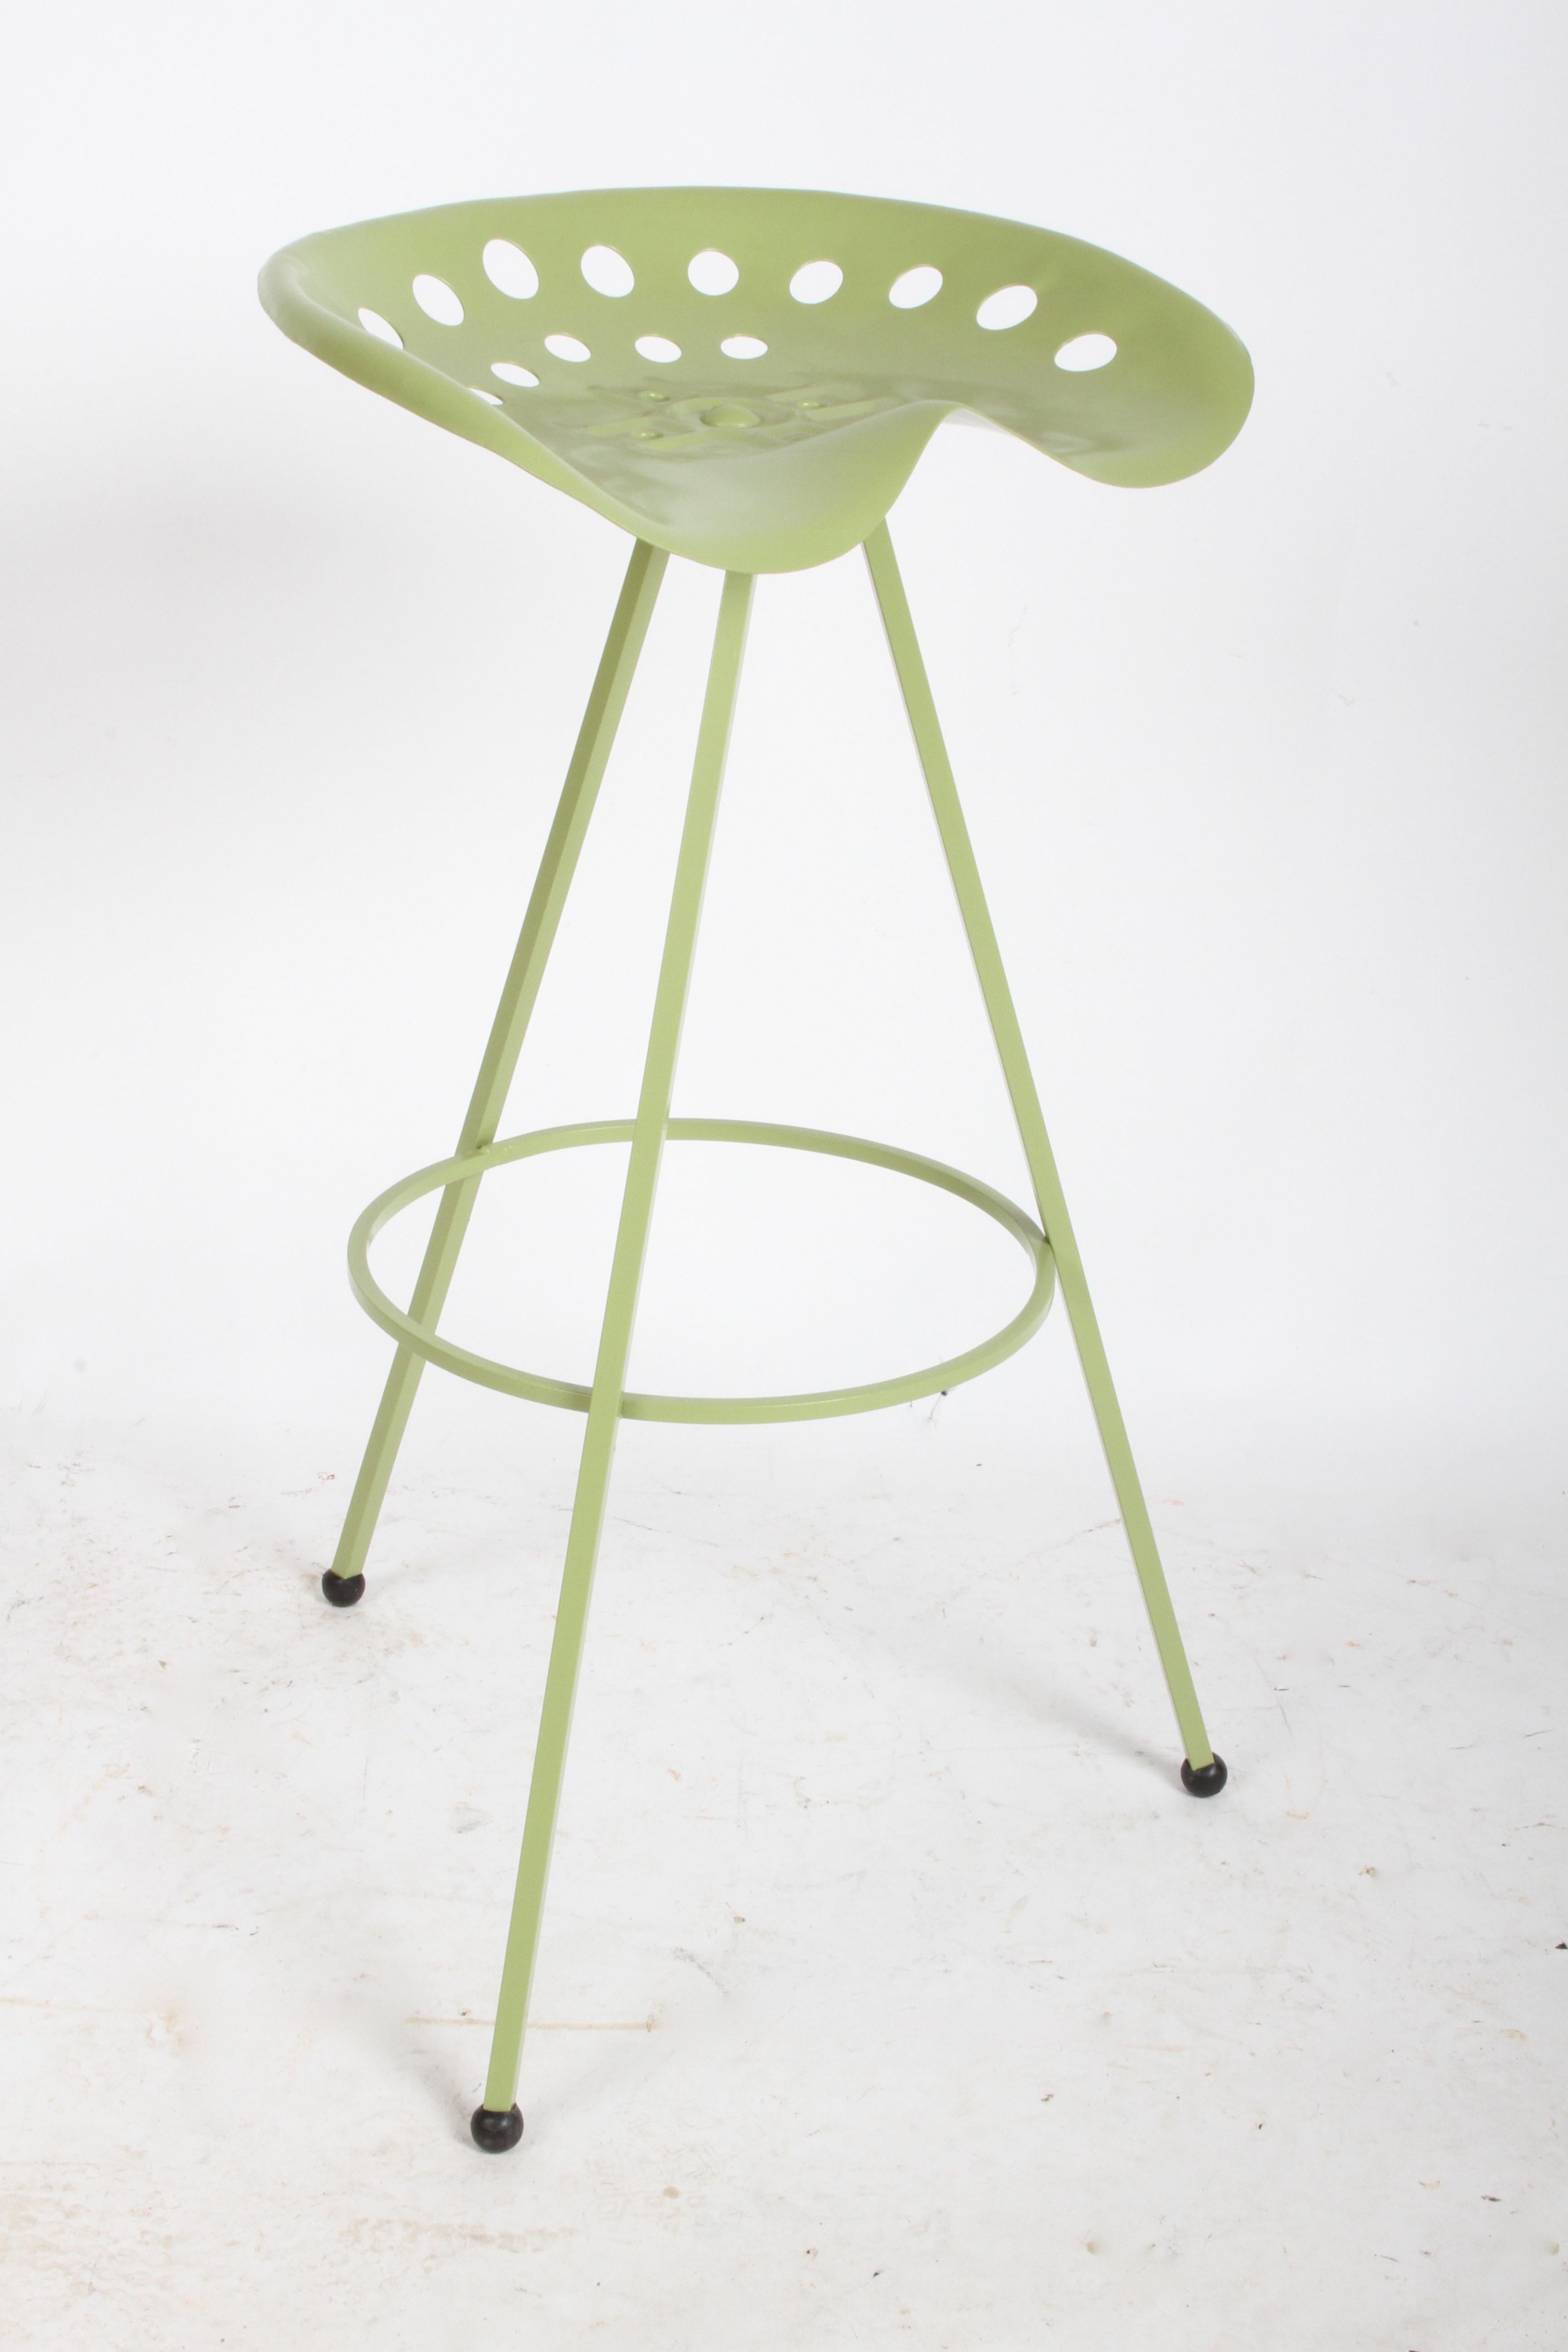 American Set of Three Midcentury Tractor Seat Bar Stools, Restored  For Sale